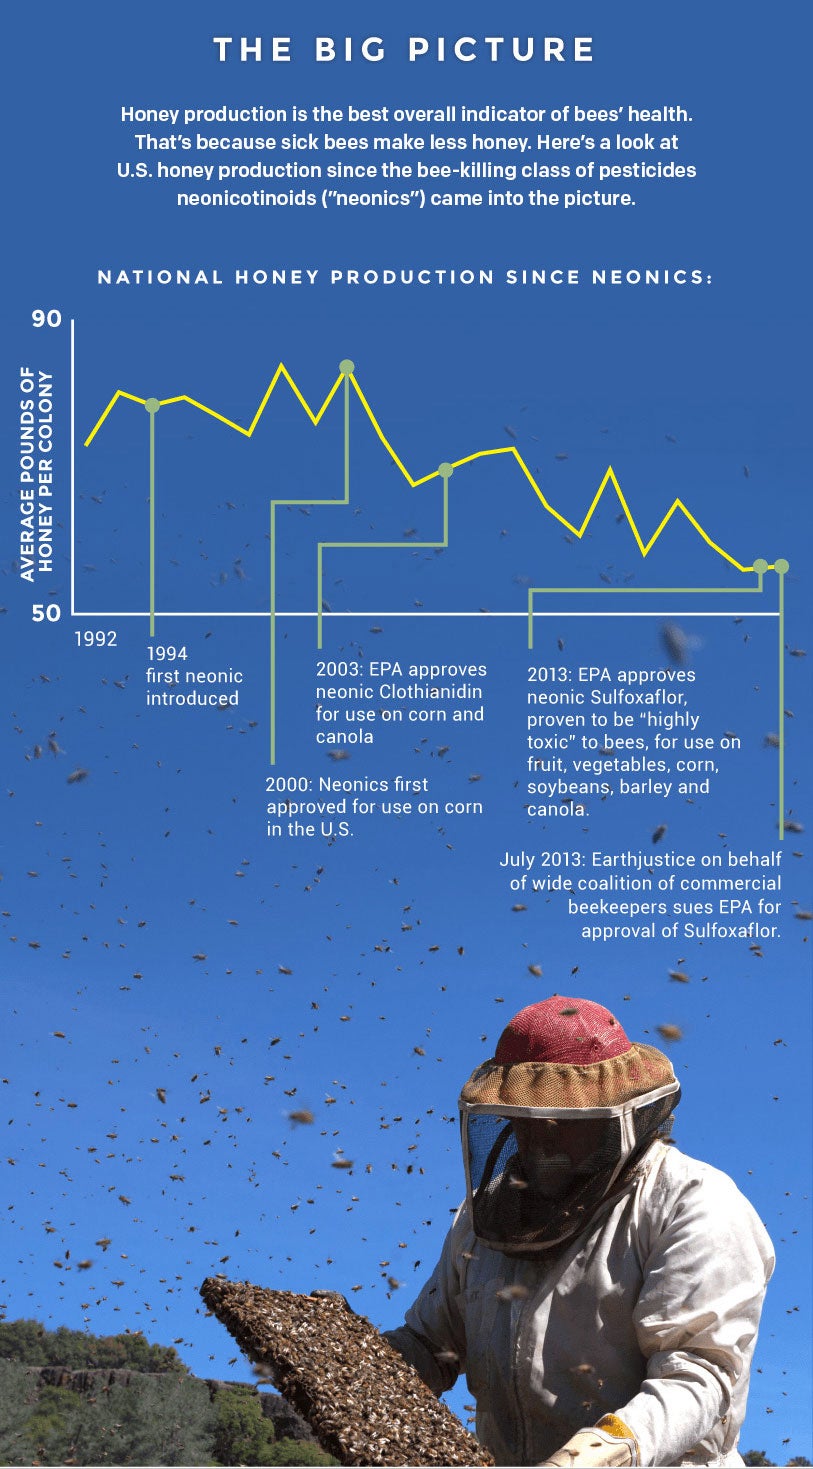 The big picture: Honey production is the best overall indicator of bees' health. That's because sick bees make less honey. Here's a look at U.S. honey production since the bee killing class of pesticides neonicotinoids came into the picture.